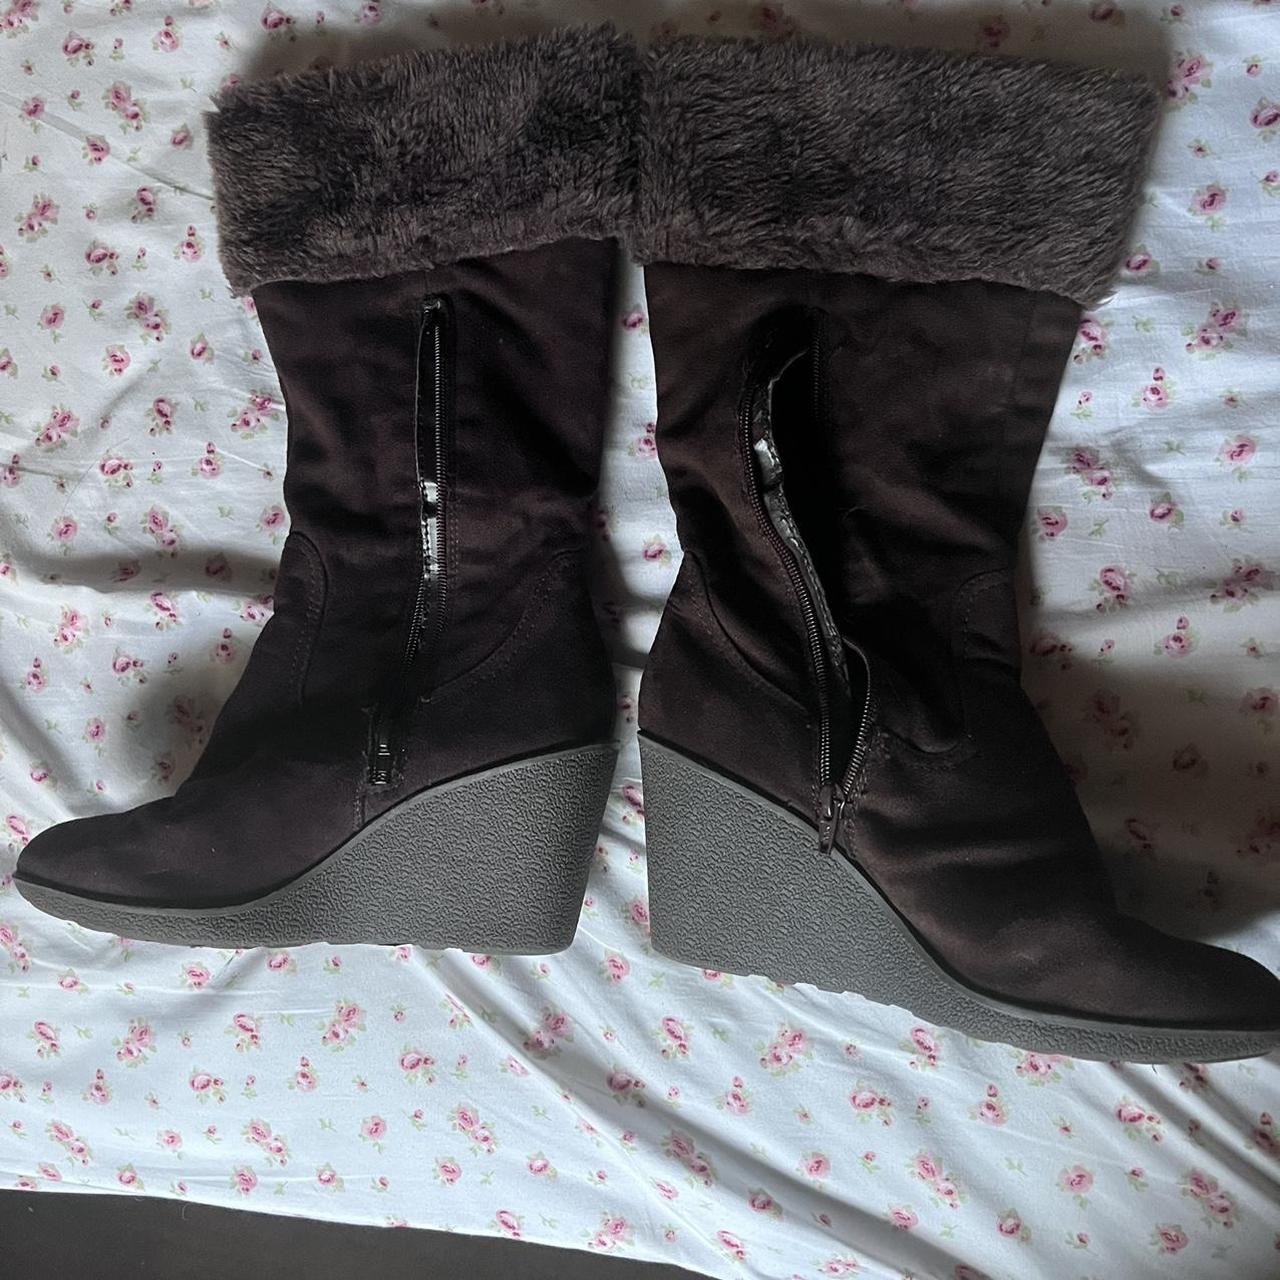 Y2k brown Platform boots 👢 If you buy these, I’ll... - Depop